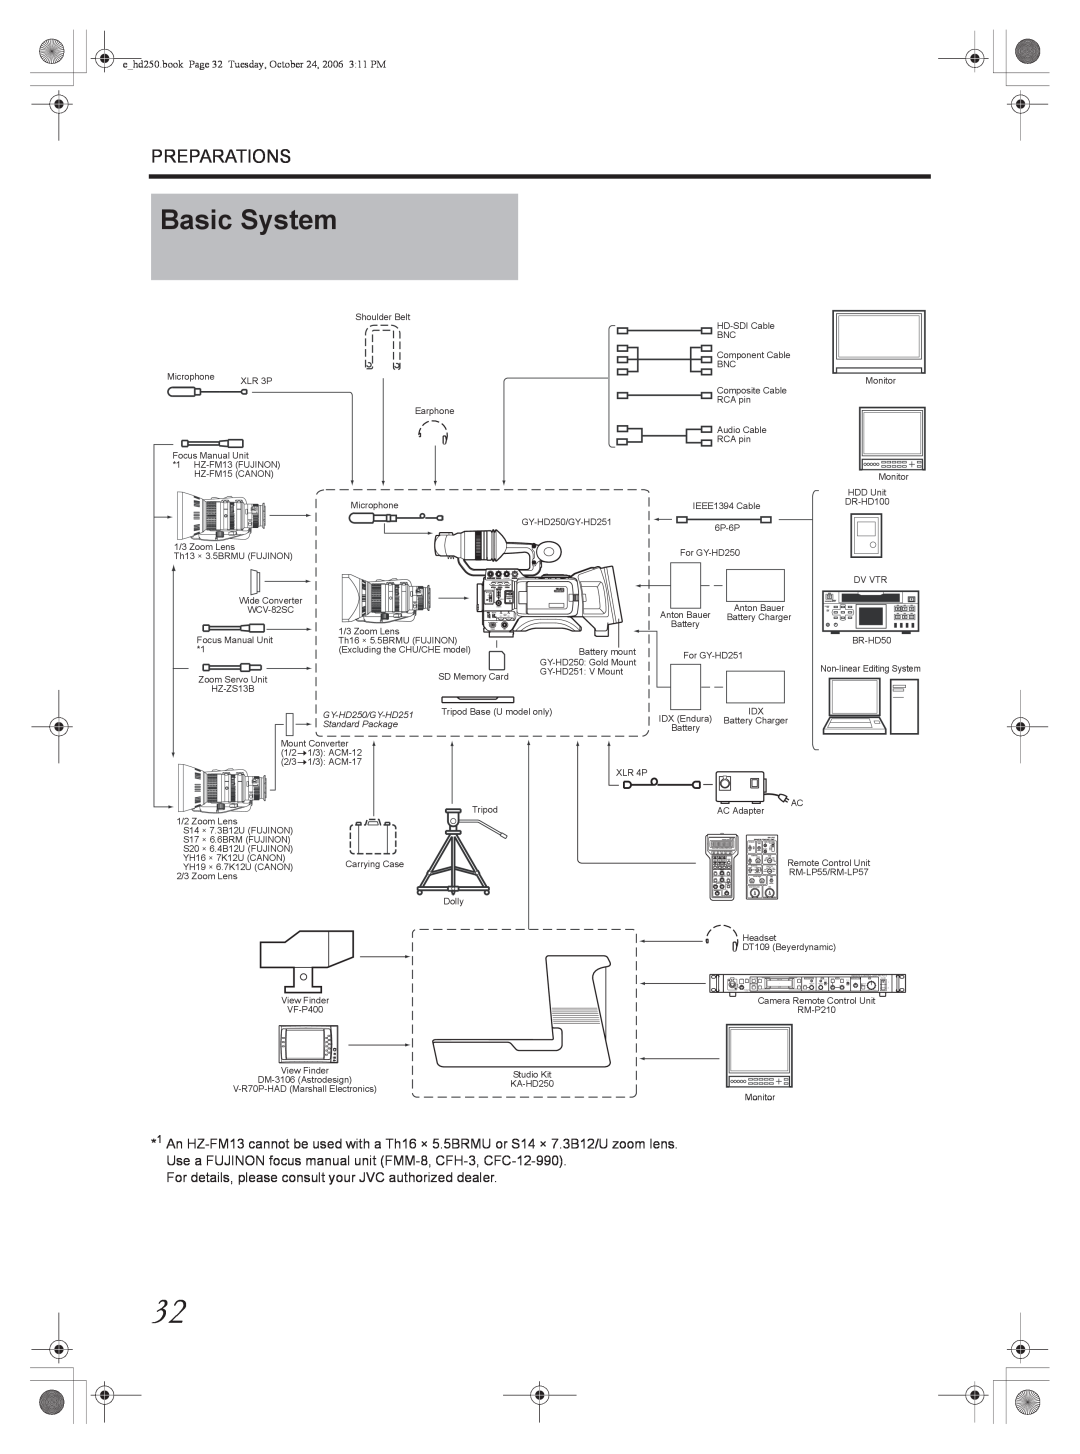 JVC manual Basic System, Preparations, ehd250.book Page 32 Tuesday, October 24, 2006 311 PM, GY-HD250/GY-HD251 